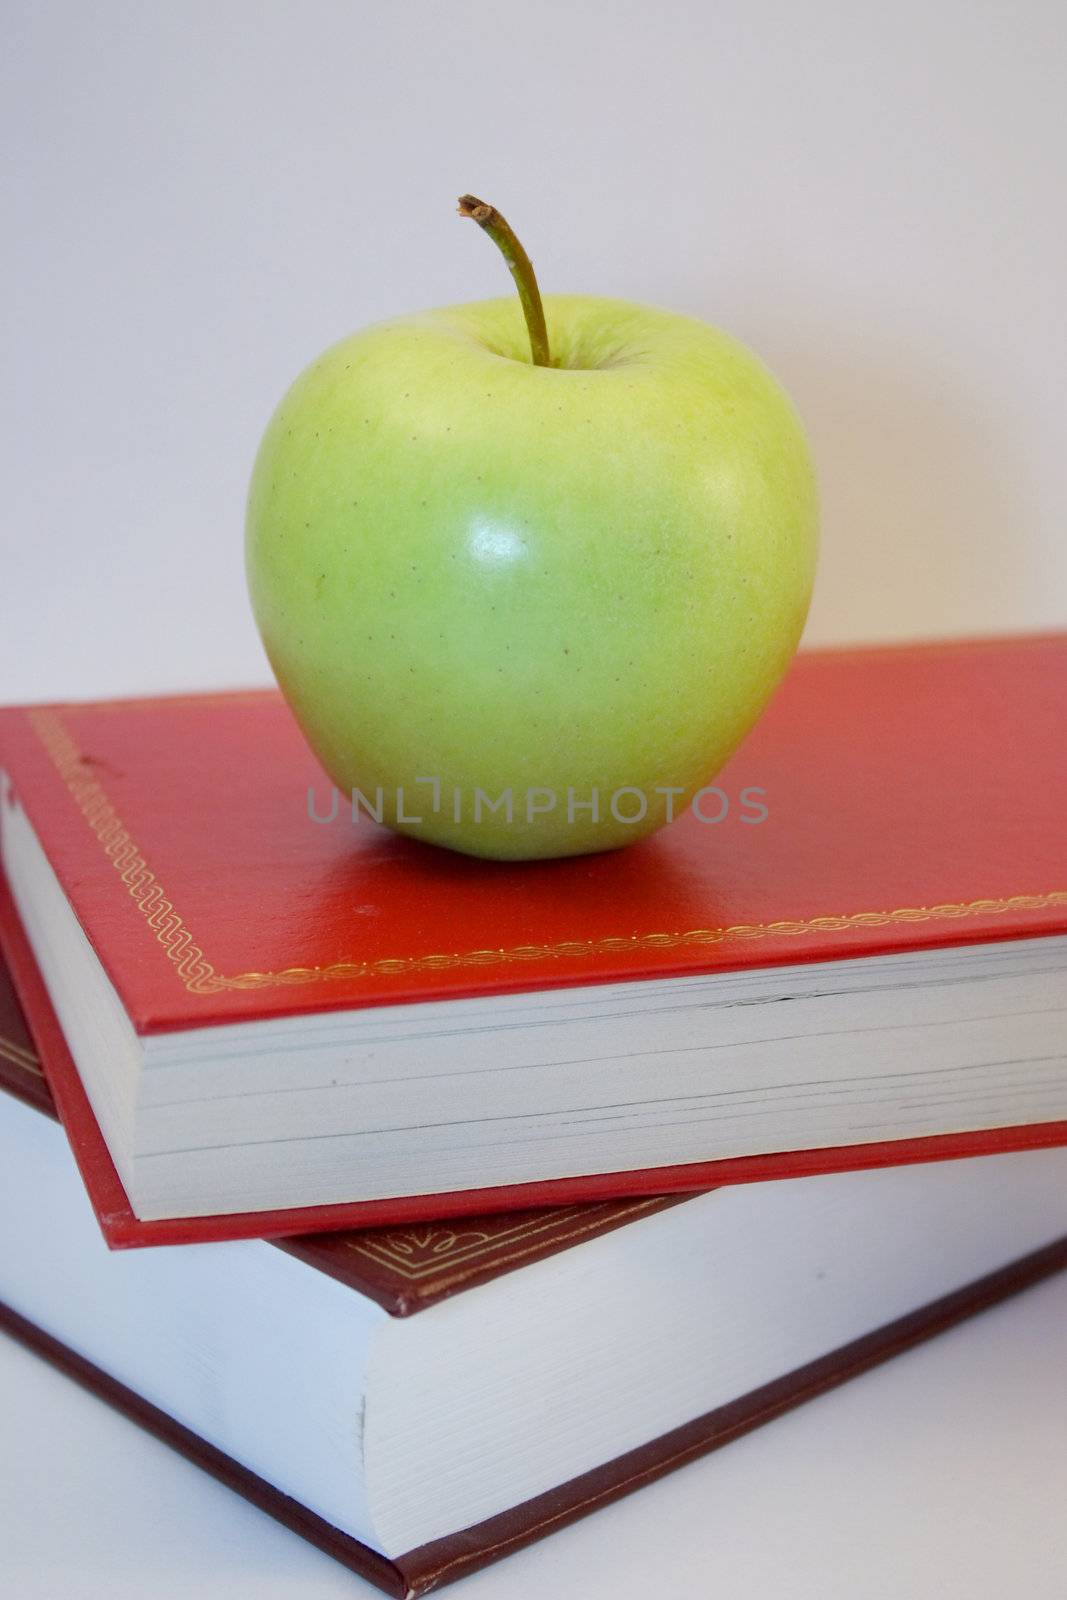 apple on books by leafy